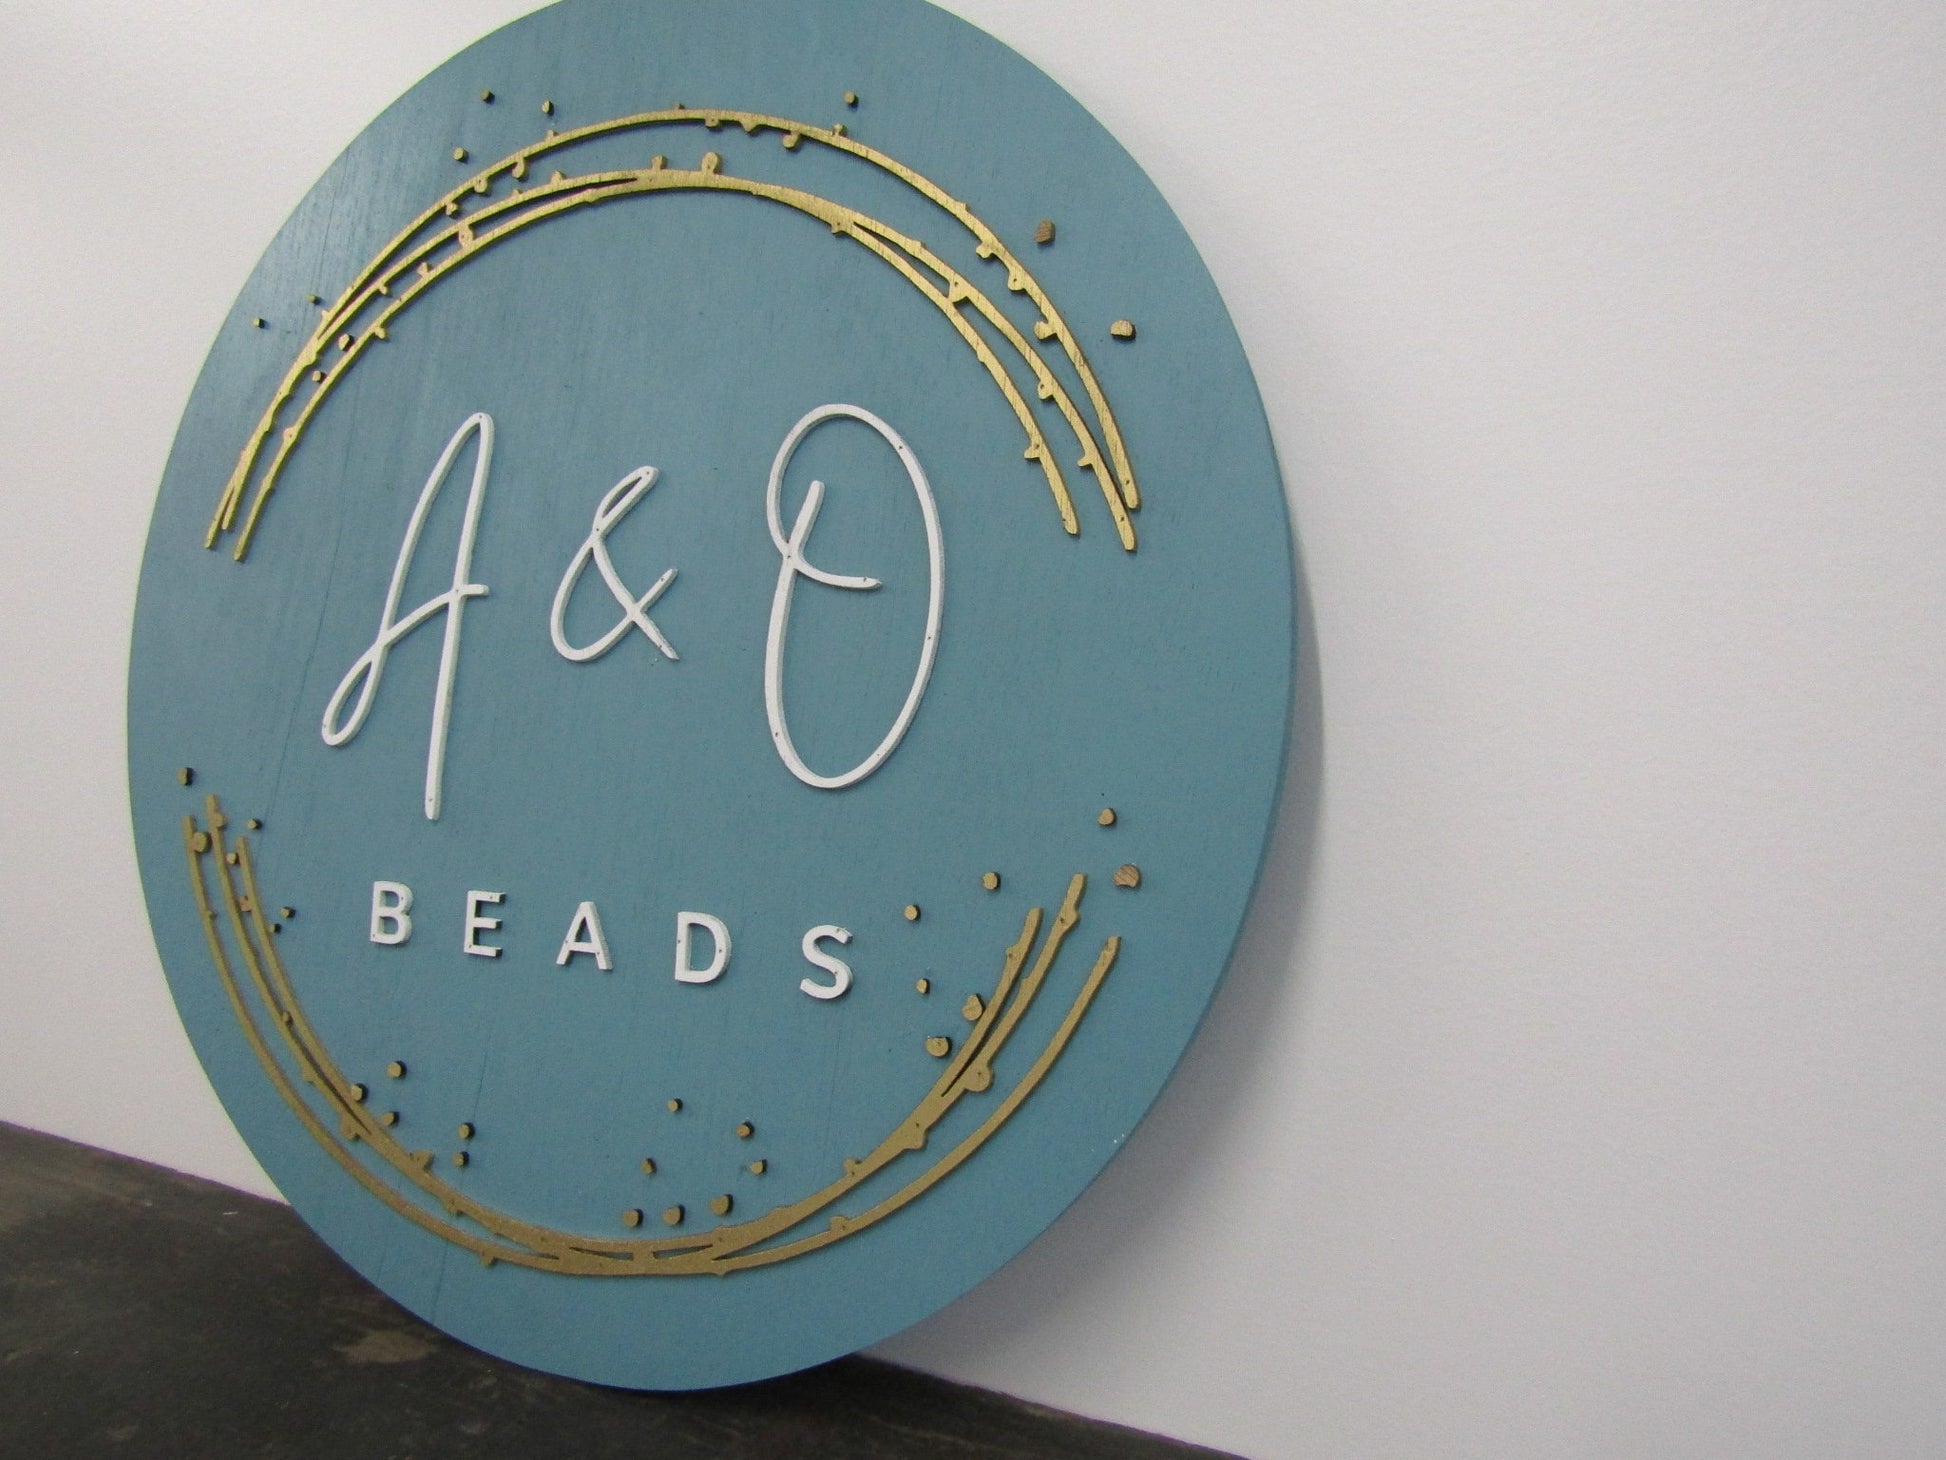 Custom Sign Round Business Commerical Signage Minimalist Made to Order Bubbles Beads Store Front Small Shop Logo Circle Wooden Handmade